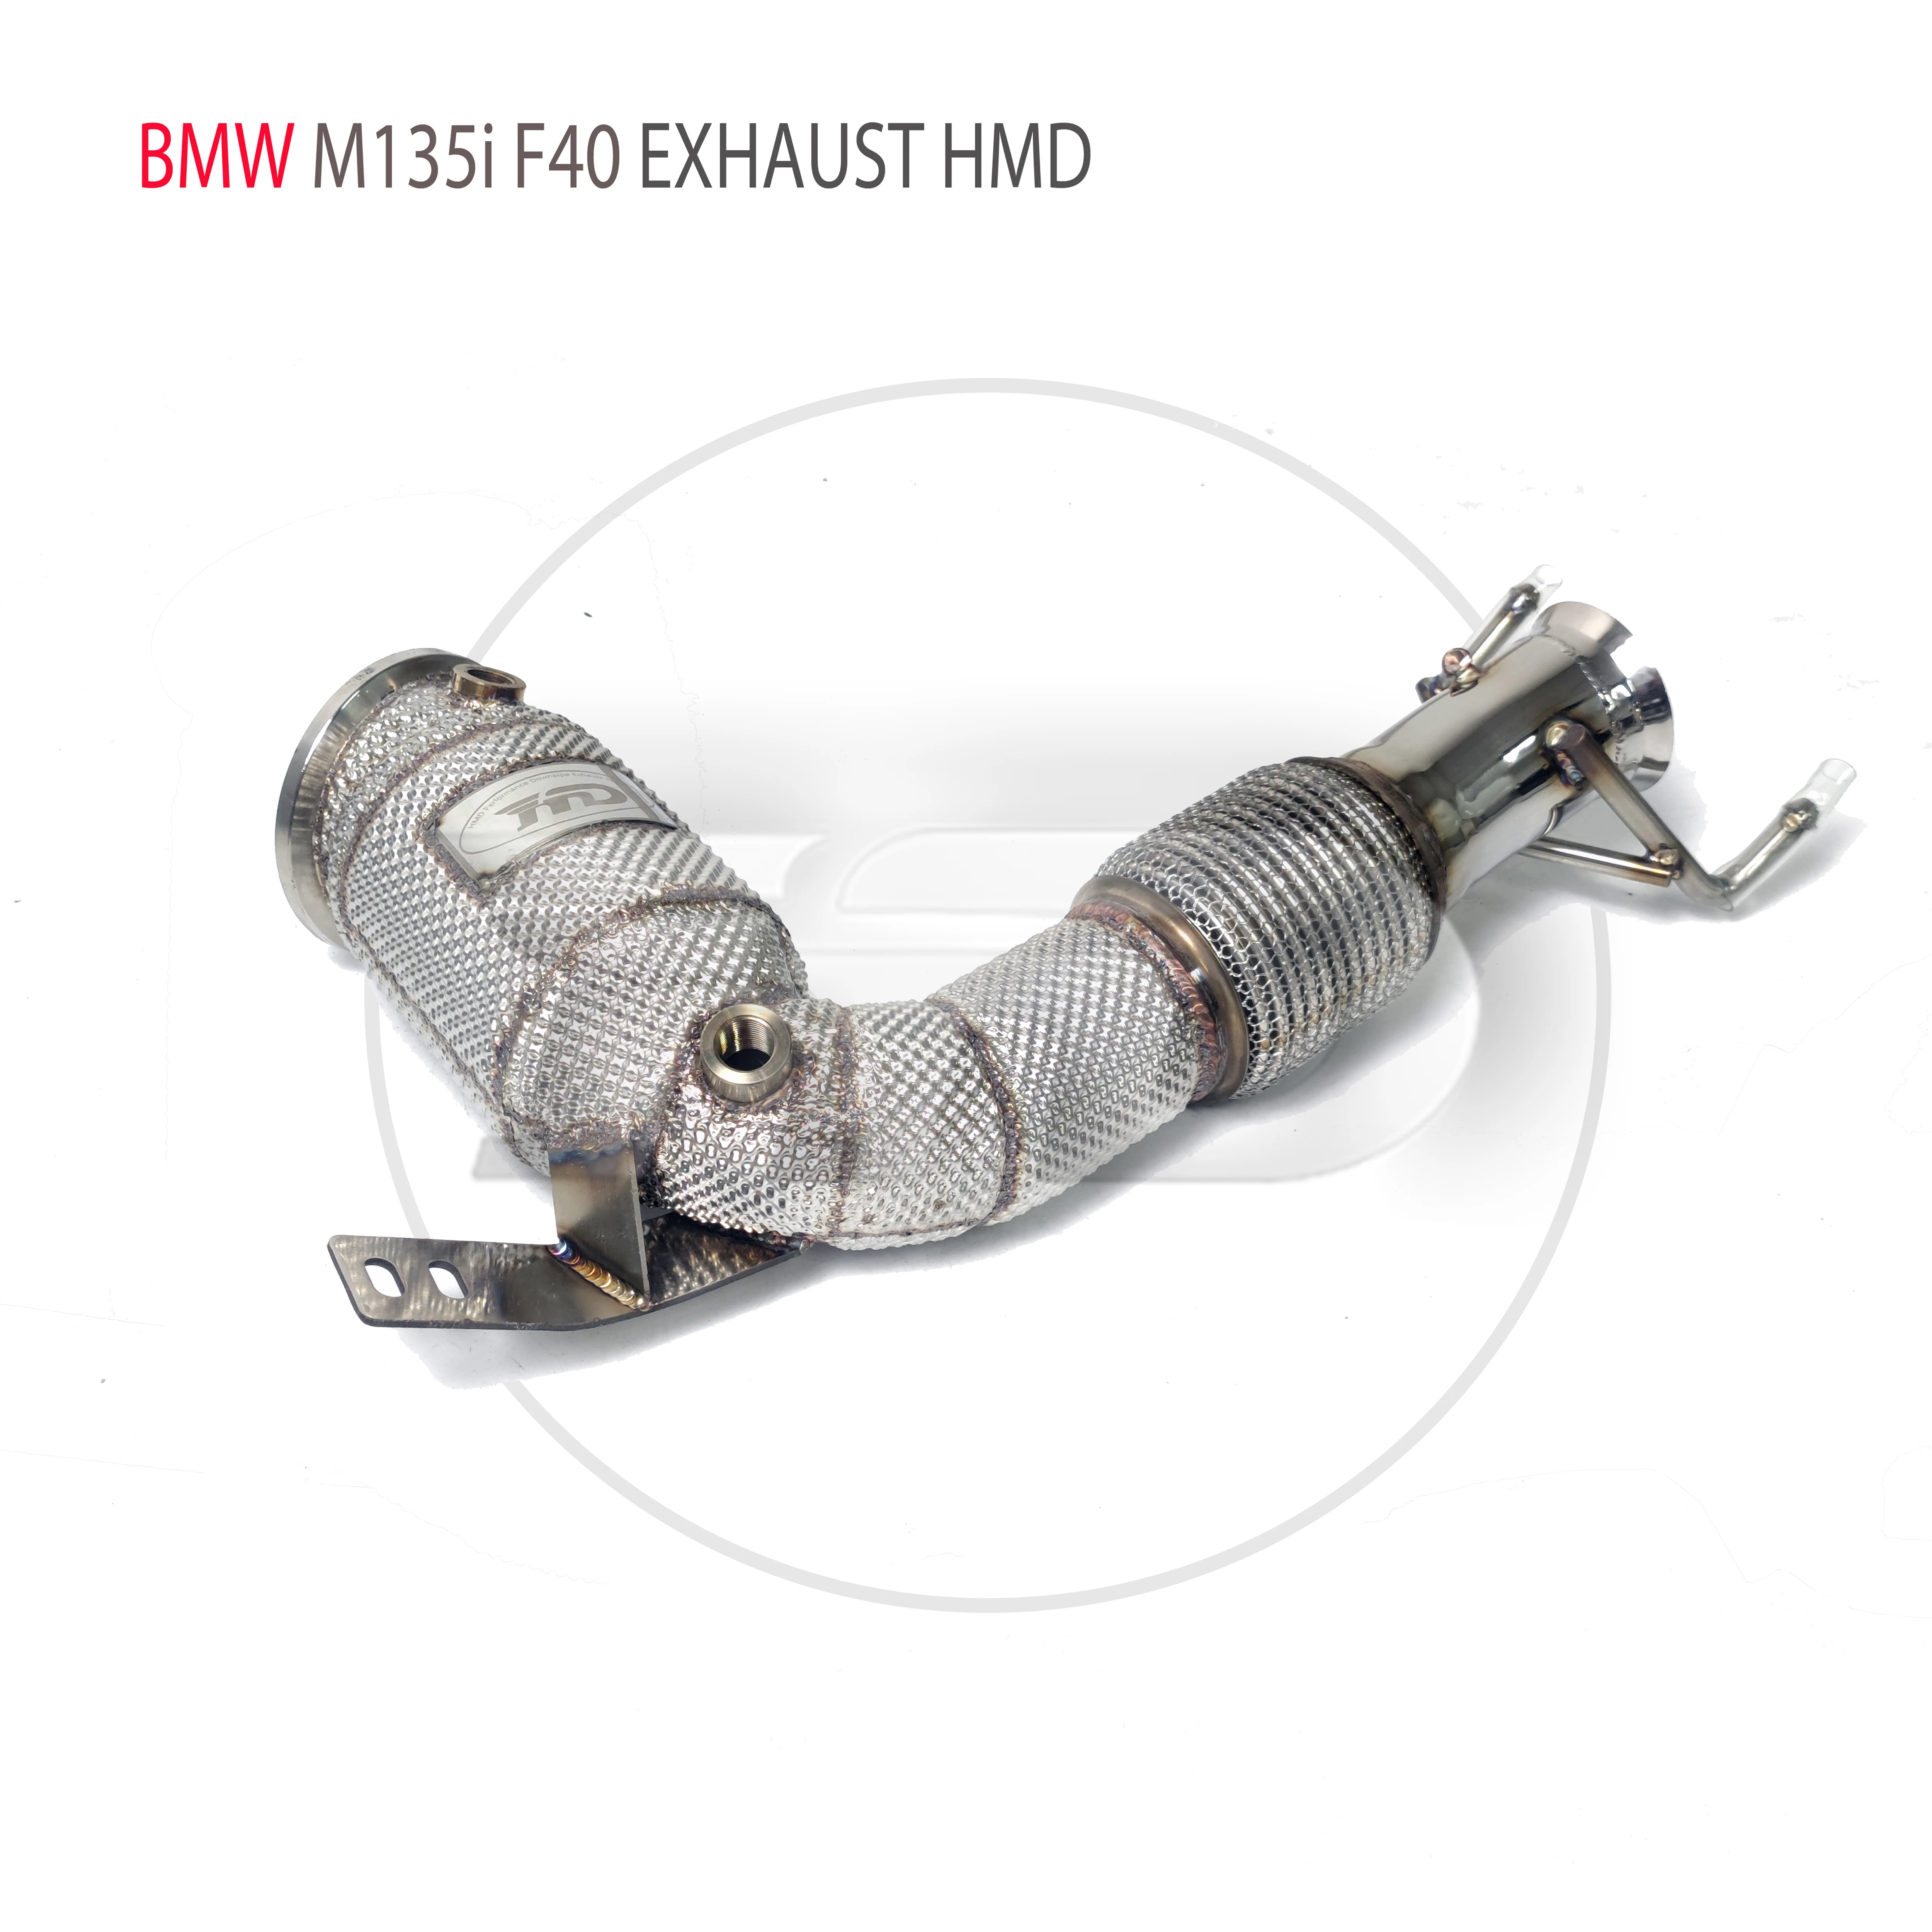 

HMD Exhaust System High Flow Performance Downpipe for BMW M135i F40 Car Accessories With Catalytic Header